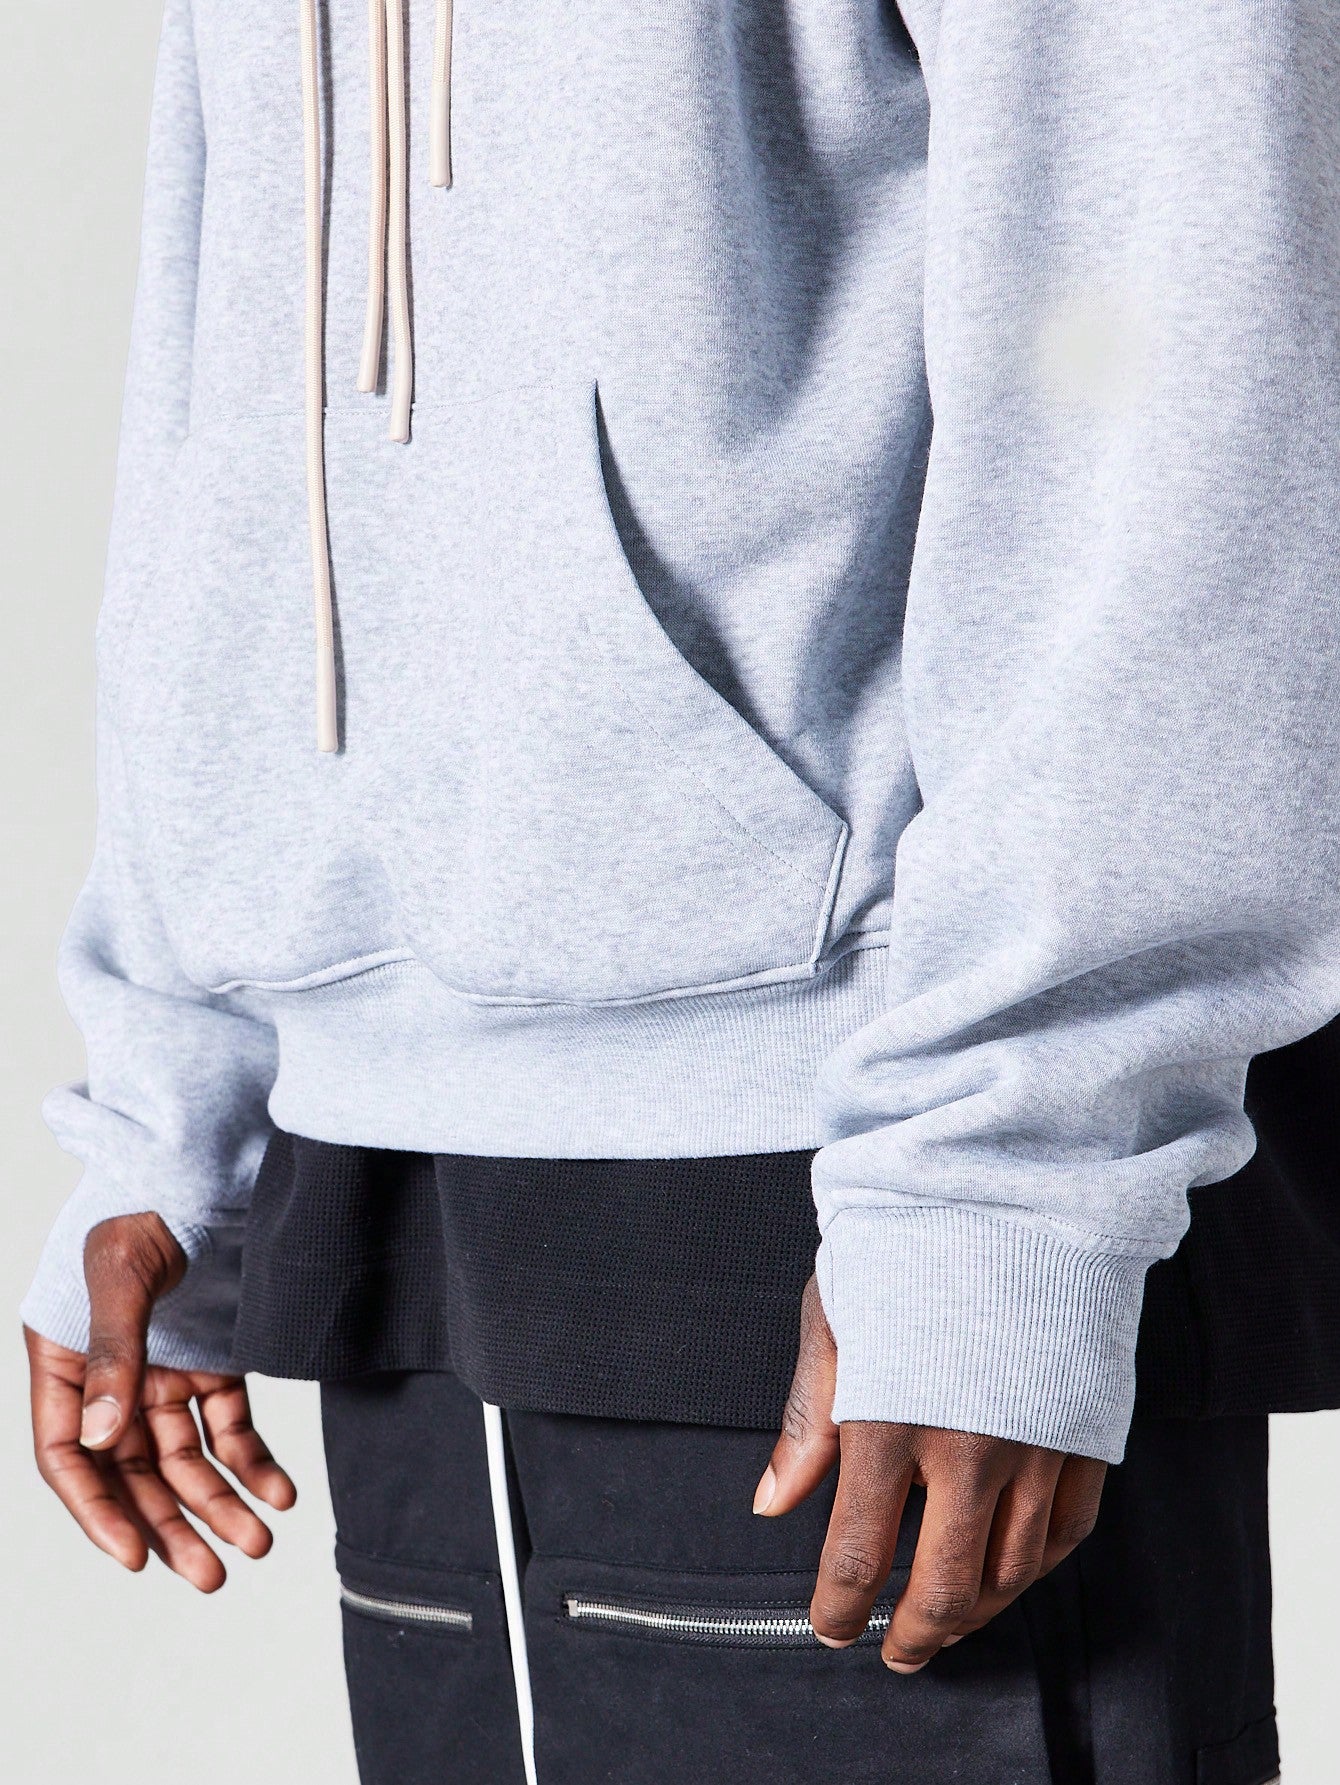 Overhead Double Hoodie With Drawcords